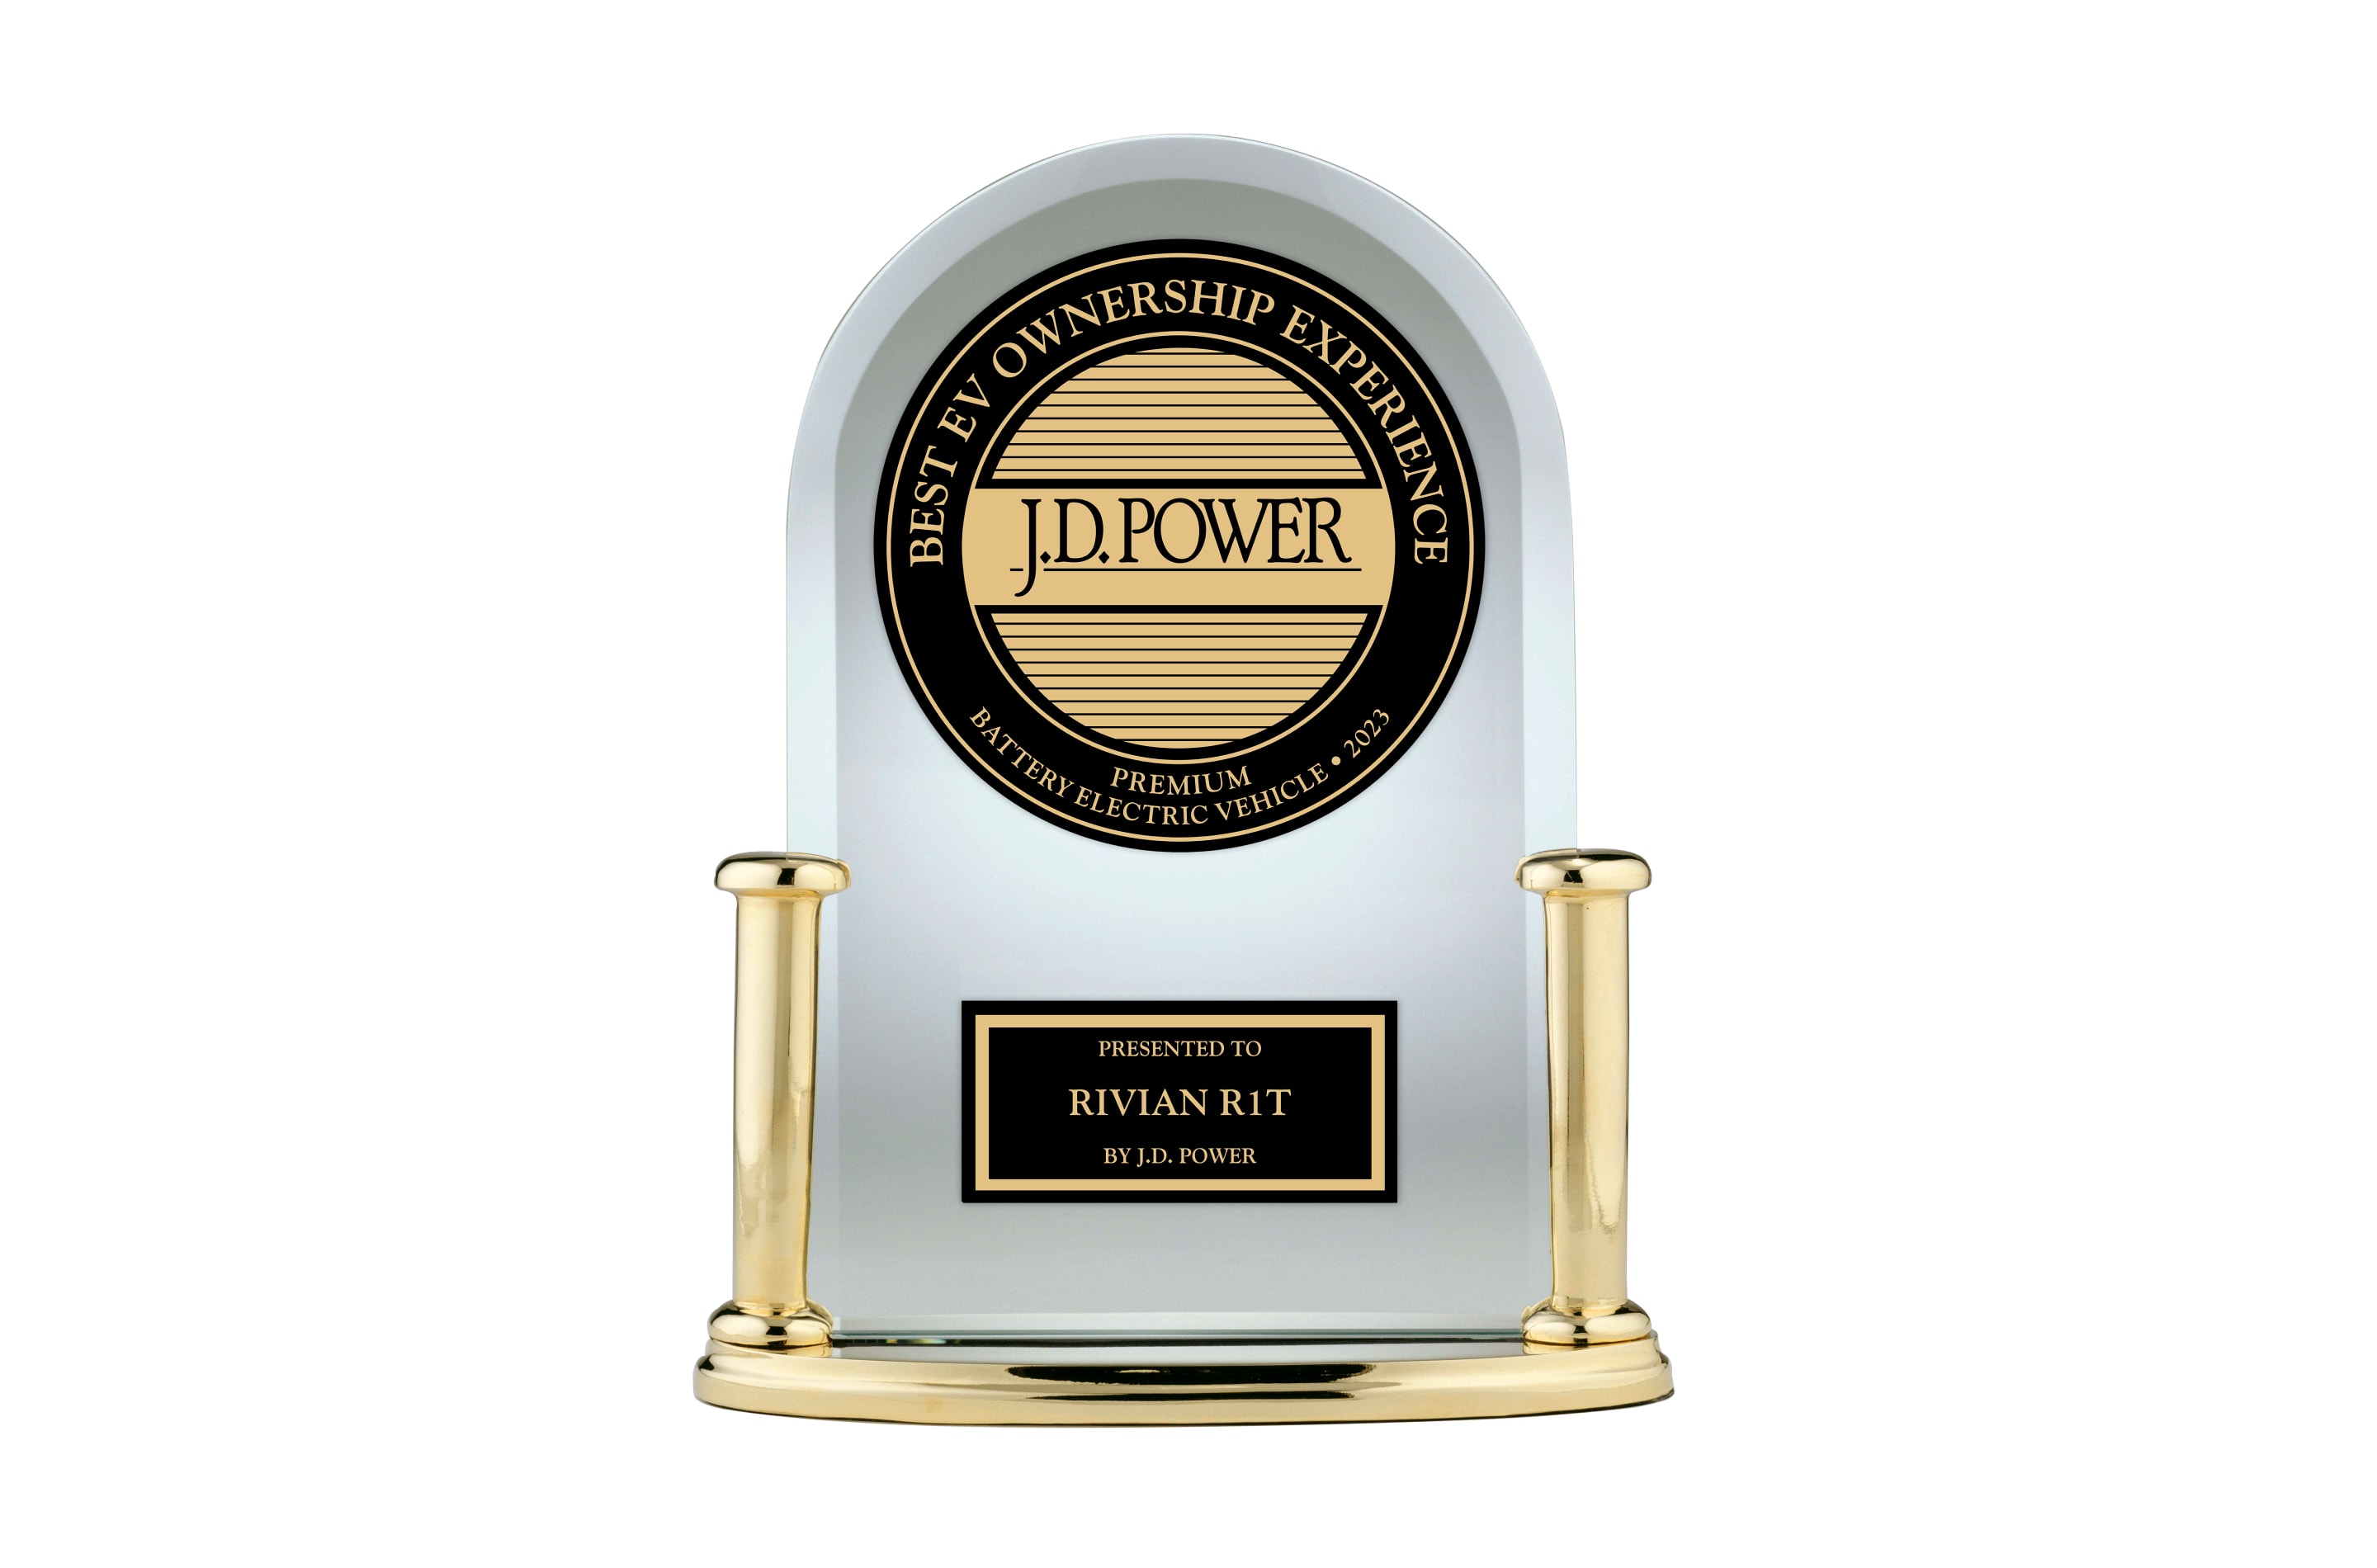 J.D. Power Award for Best Ownership Experience for Battery Electric Vehicles